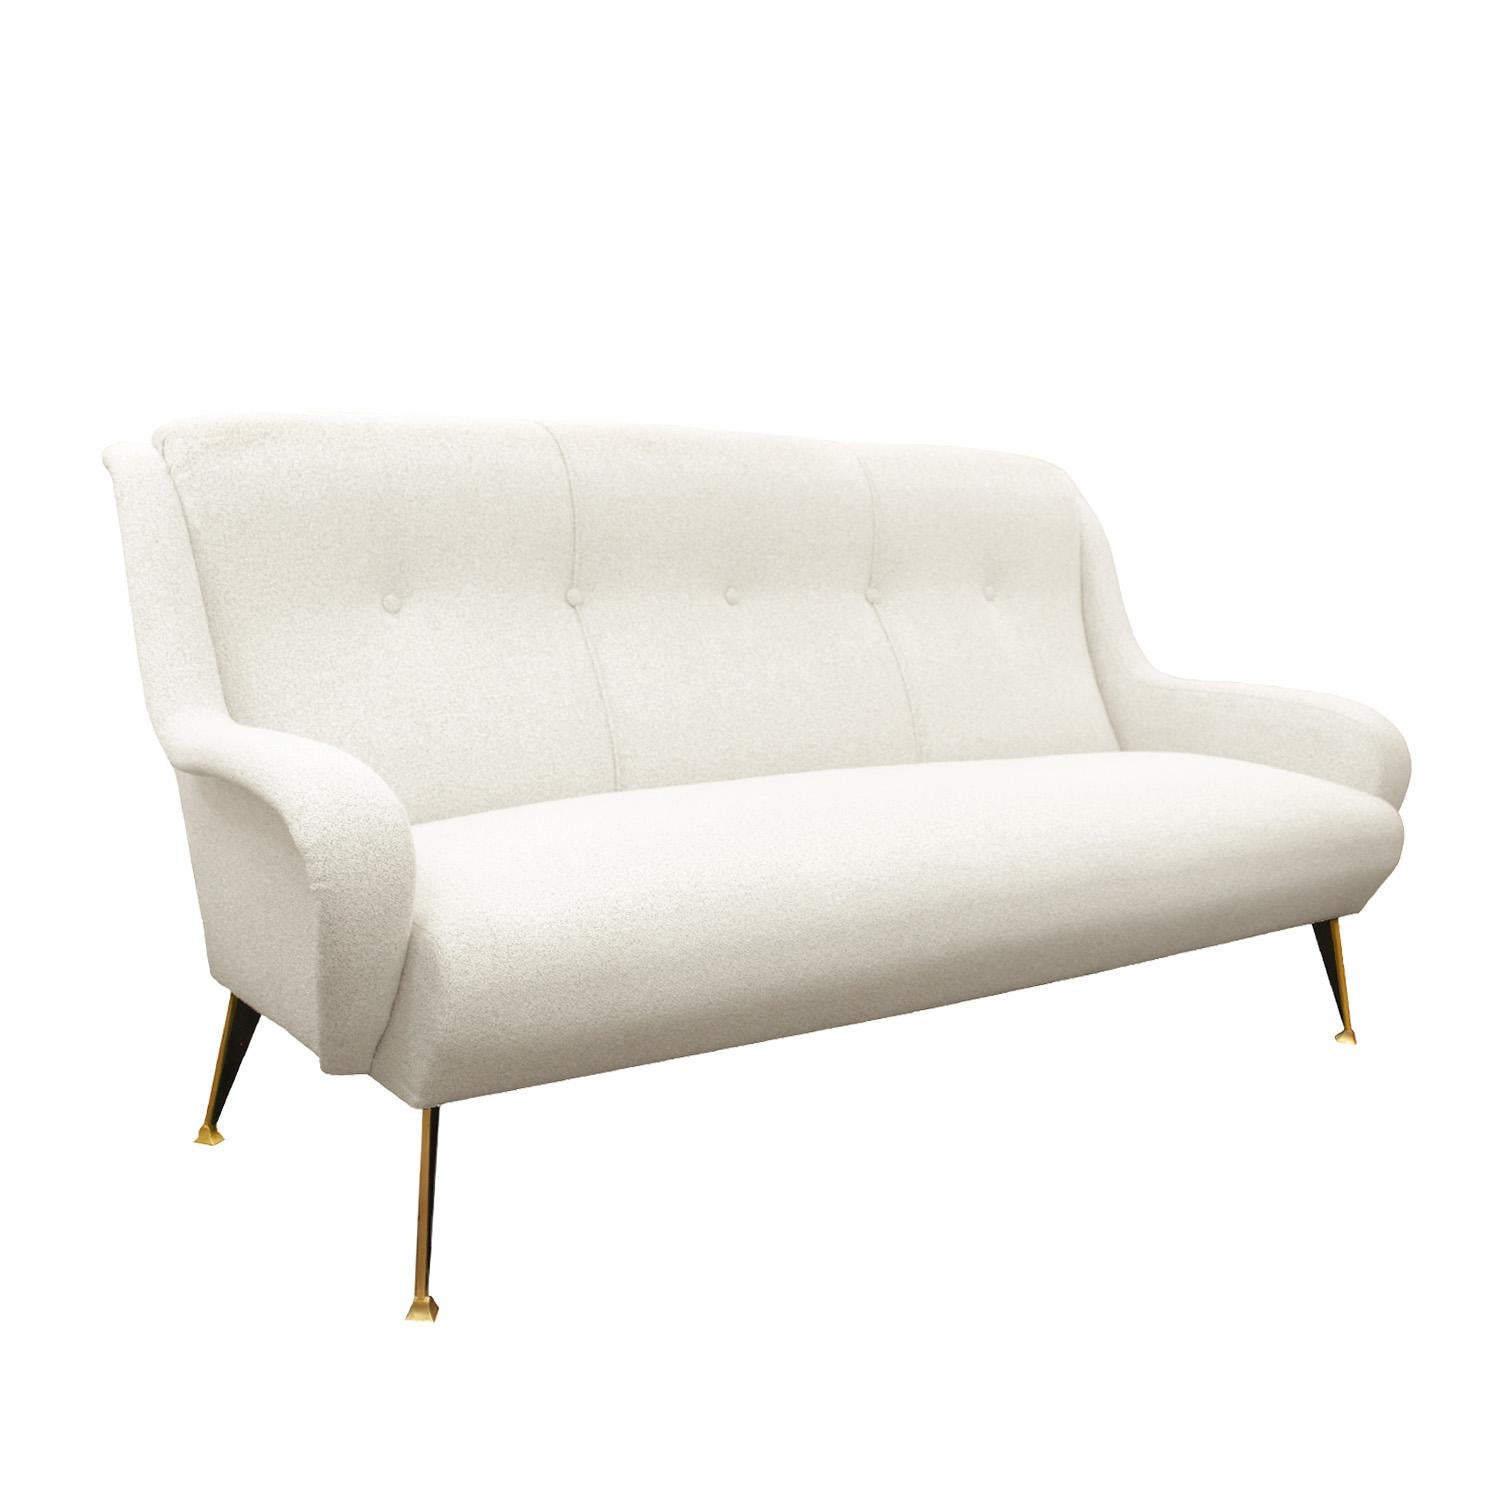 Chic Mid-Century Modern sofa with brass legs in the style of Marco Zanuso.
 Italy, 1960's. 

Newly upholstered in pebble color JAB indoor/outdoor fabric by Venfield.